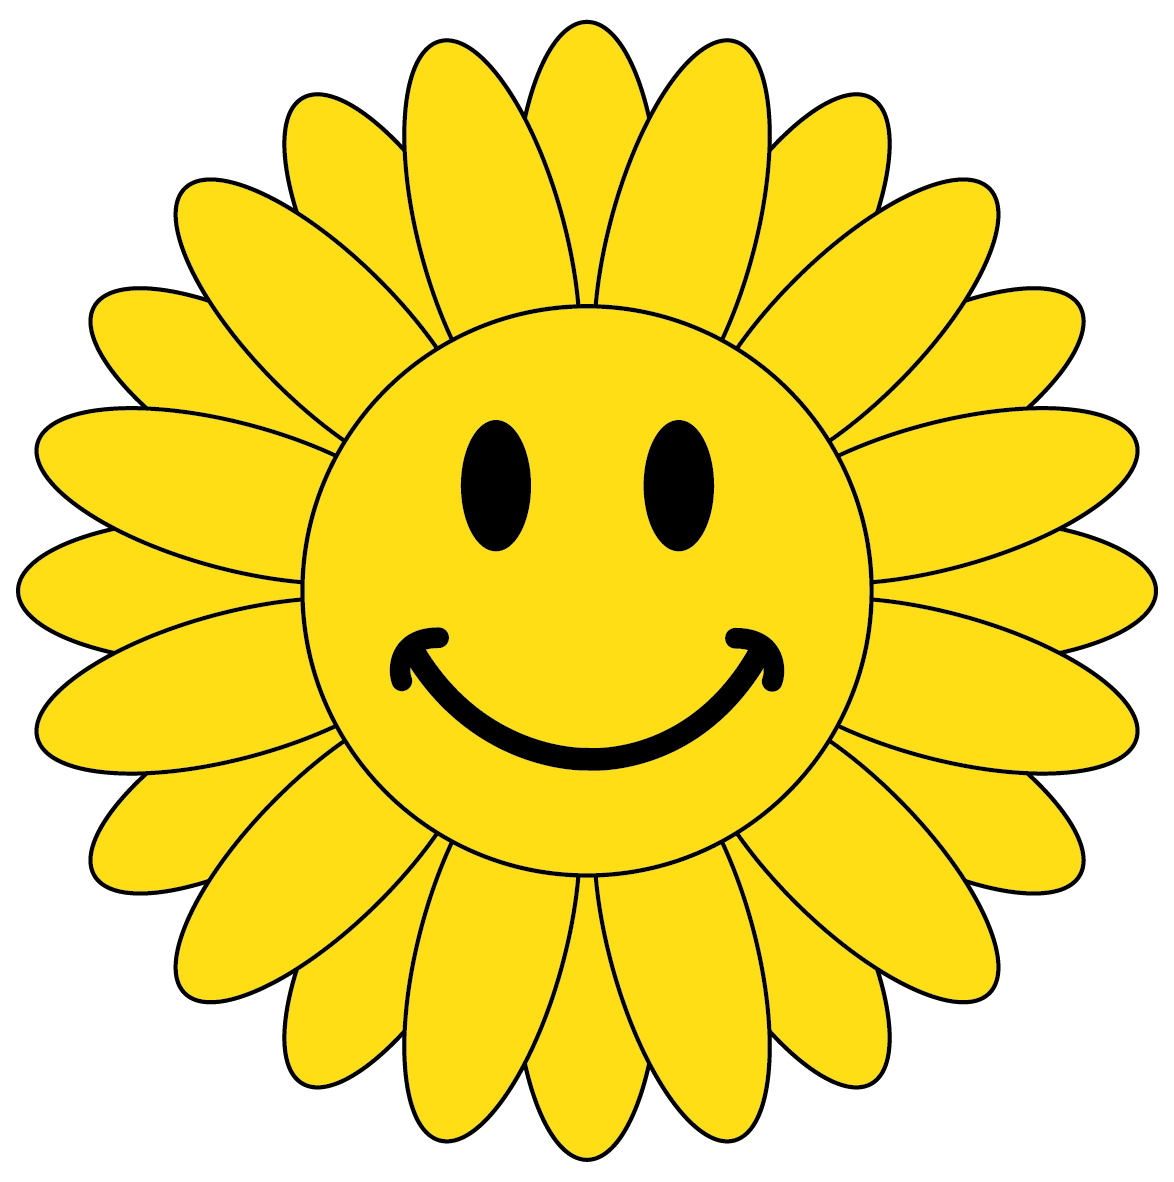 Animated Smiley Face Clip Art - ClipArt Best - ClipArt Best